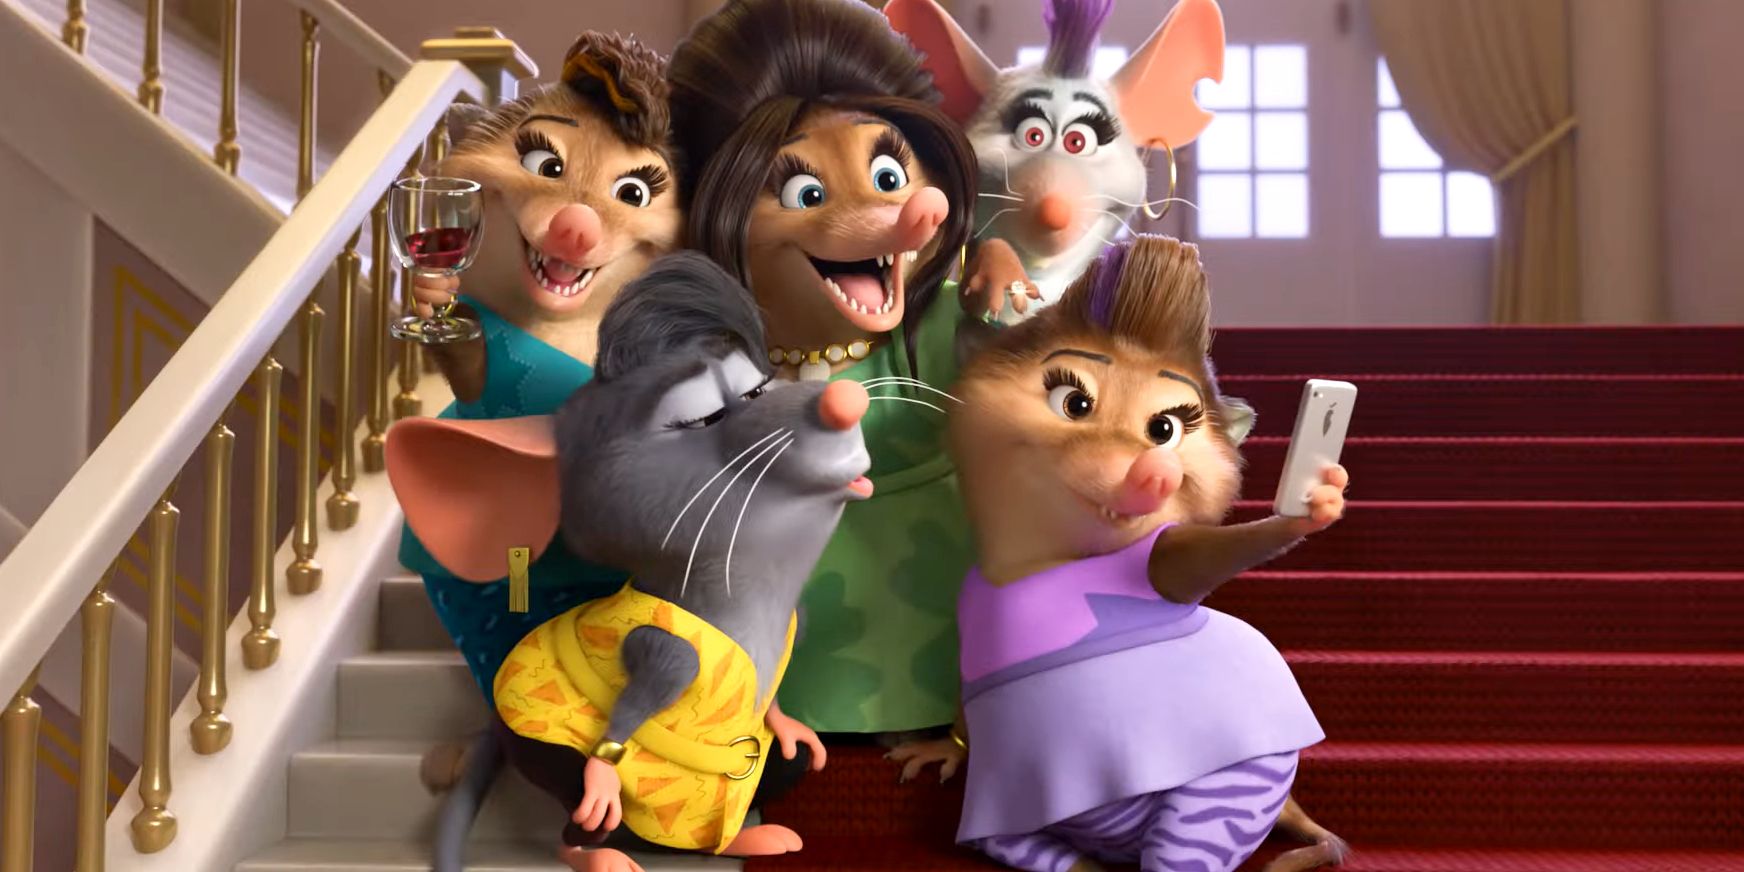 Screenshot from the Zootopia+ trailer